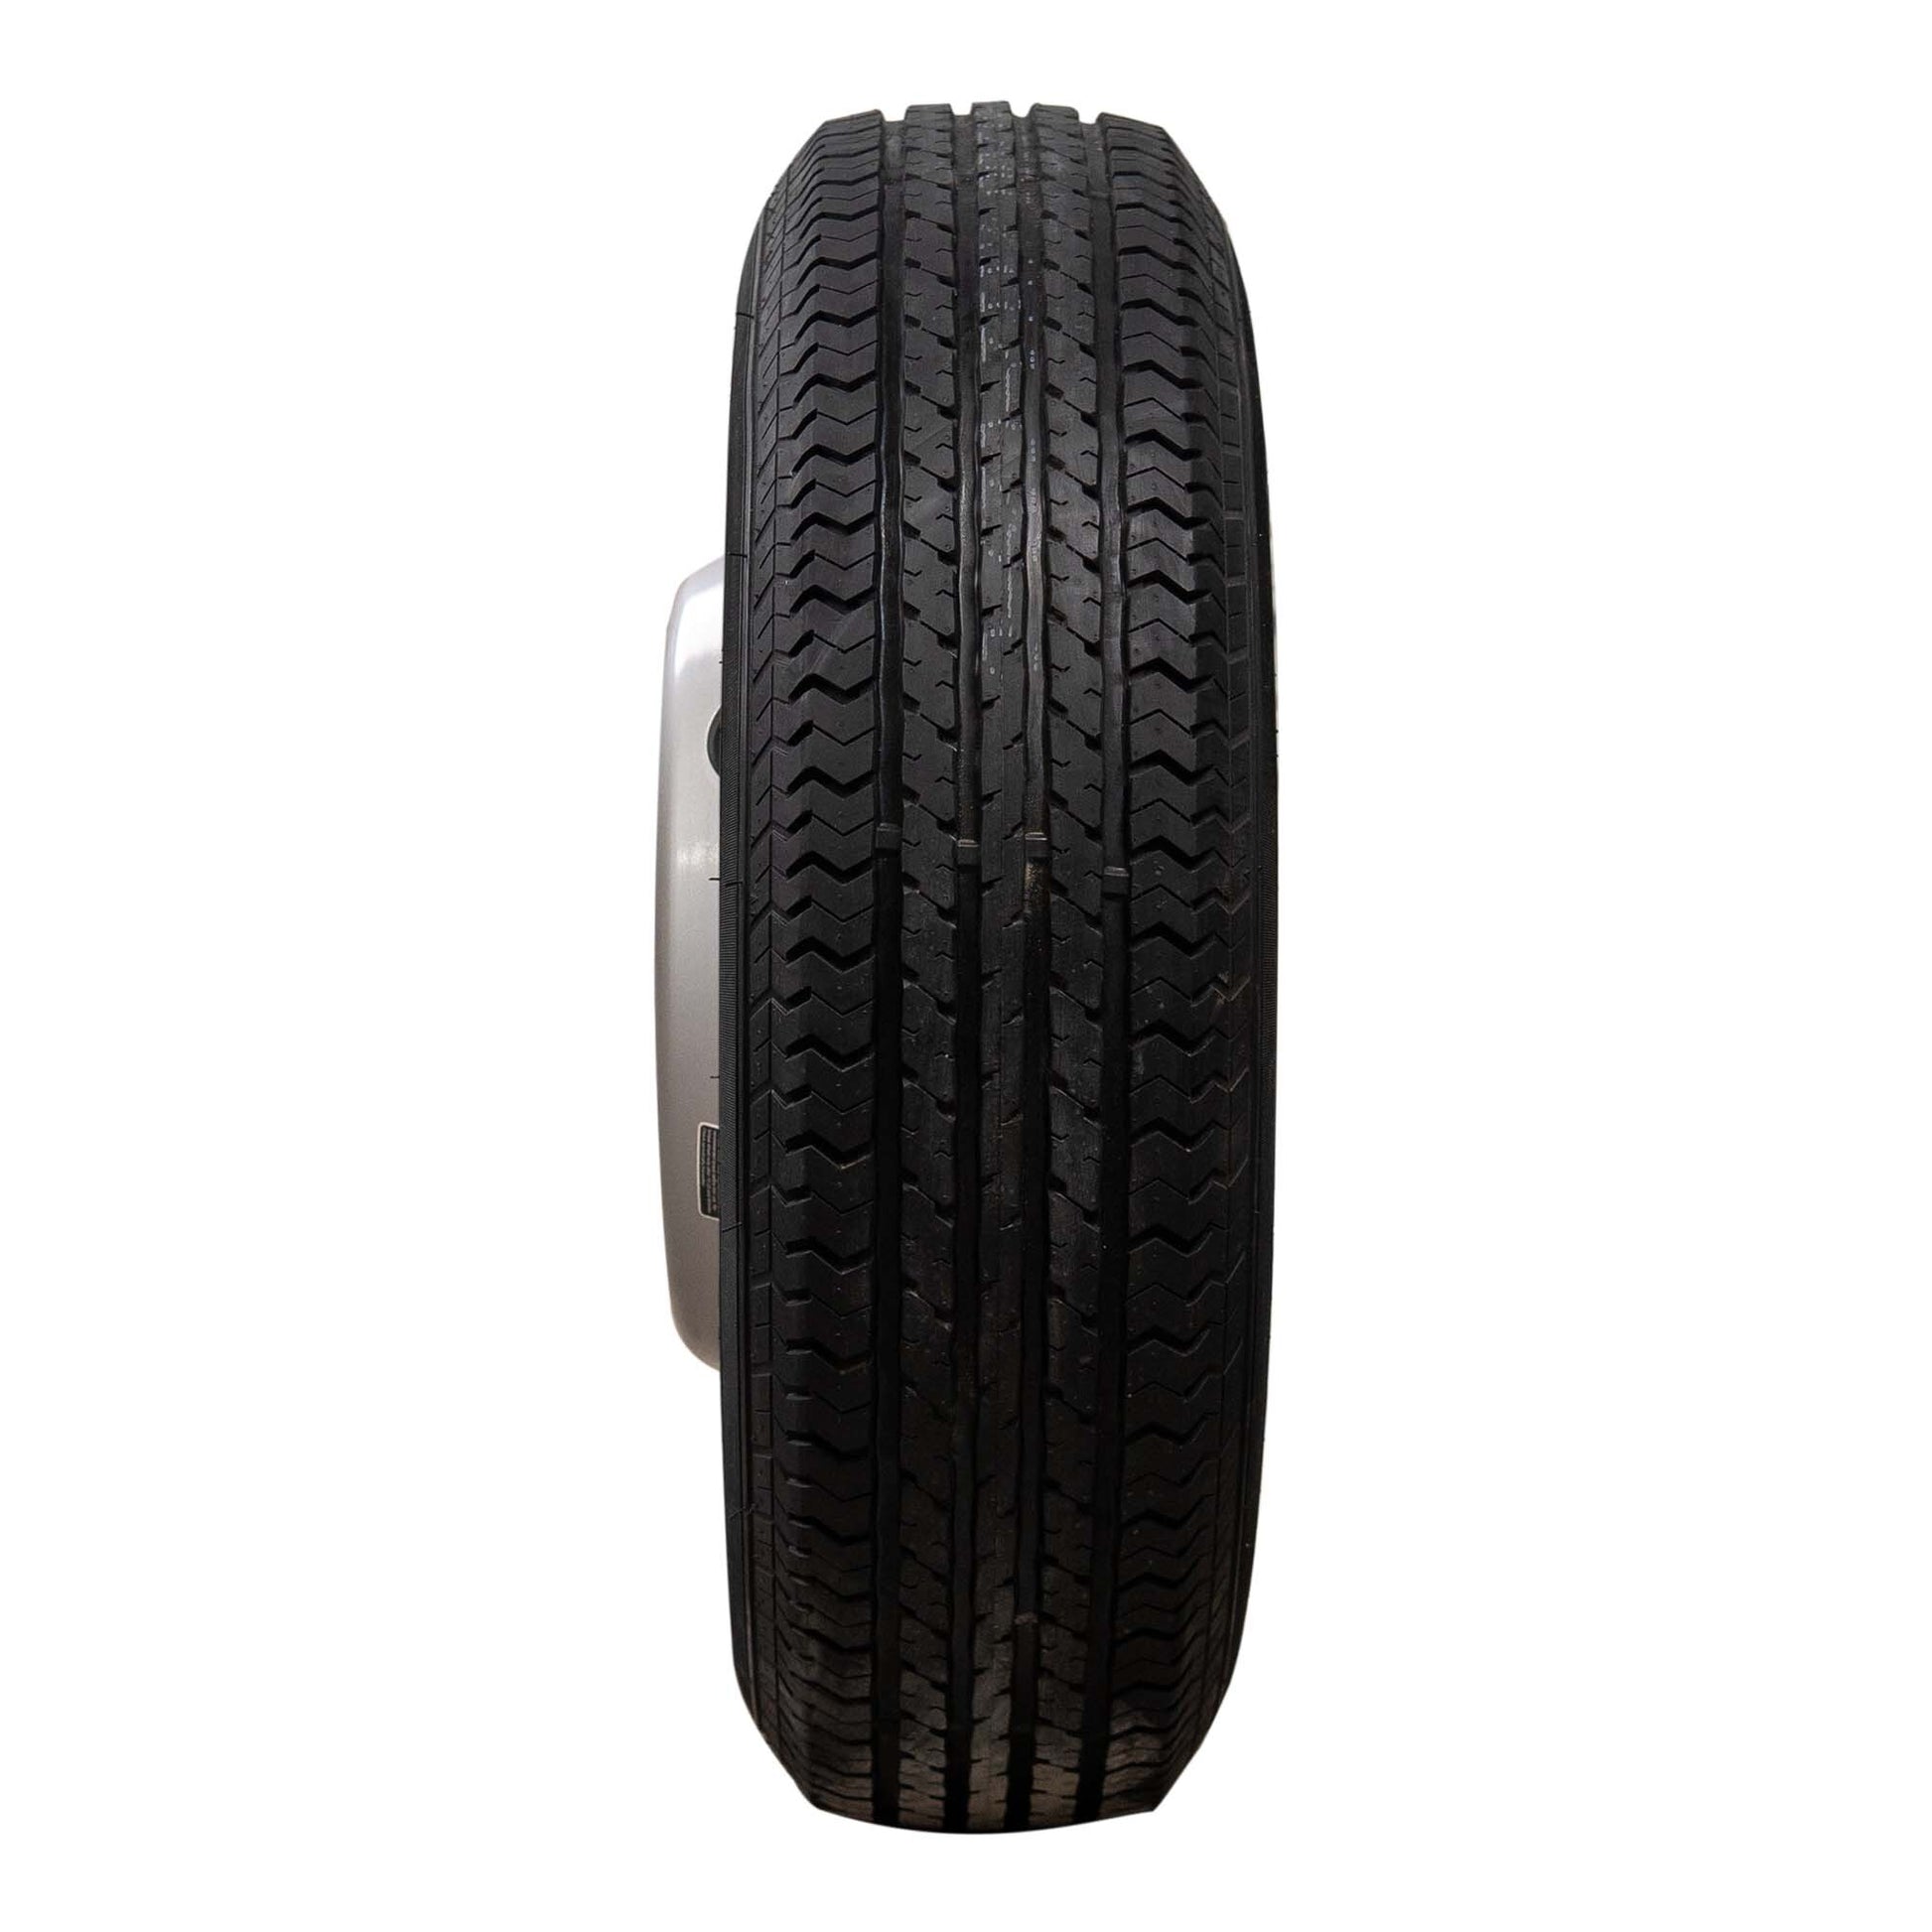 Goodride 16" 10 ply Radial Trailer Tire & Wheel - ST 235/80 R16 8 lug Dual - The Trailer Parts Outlet